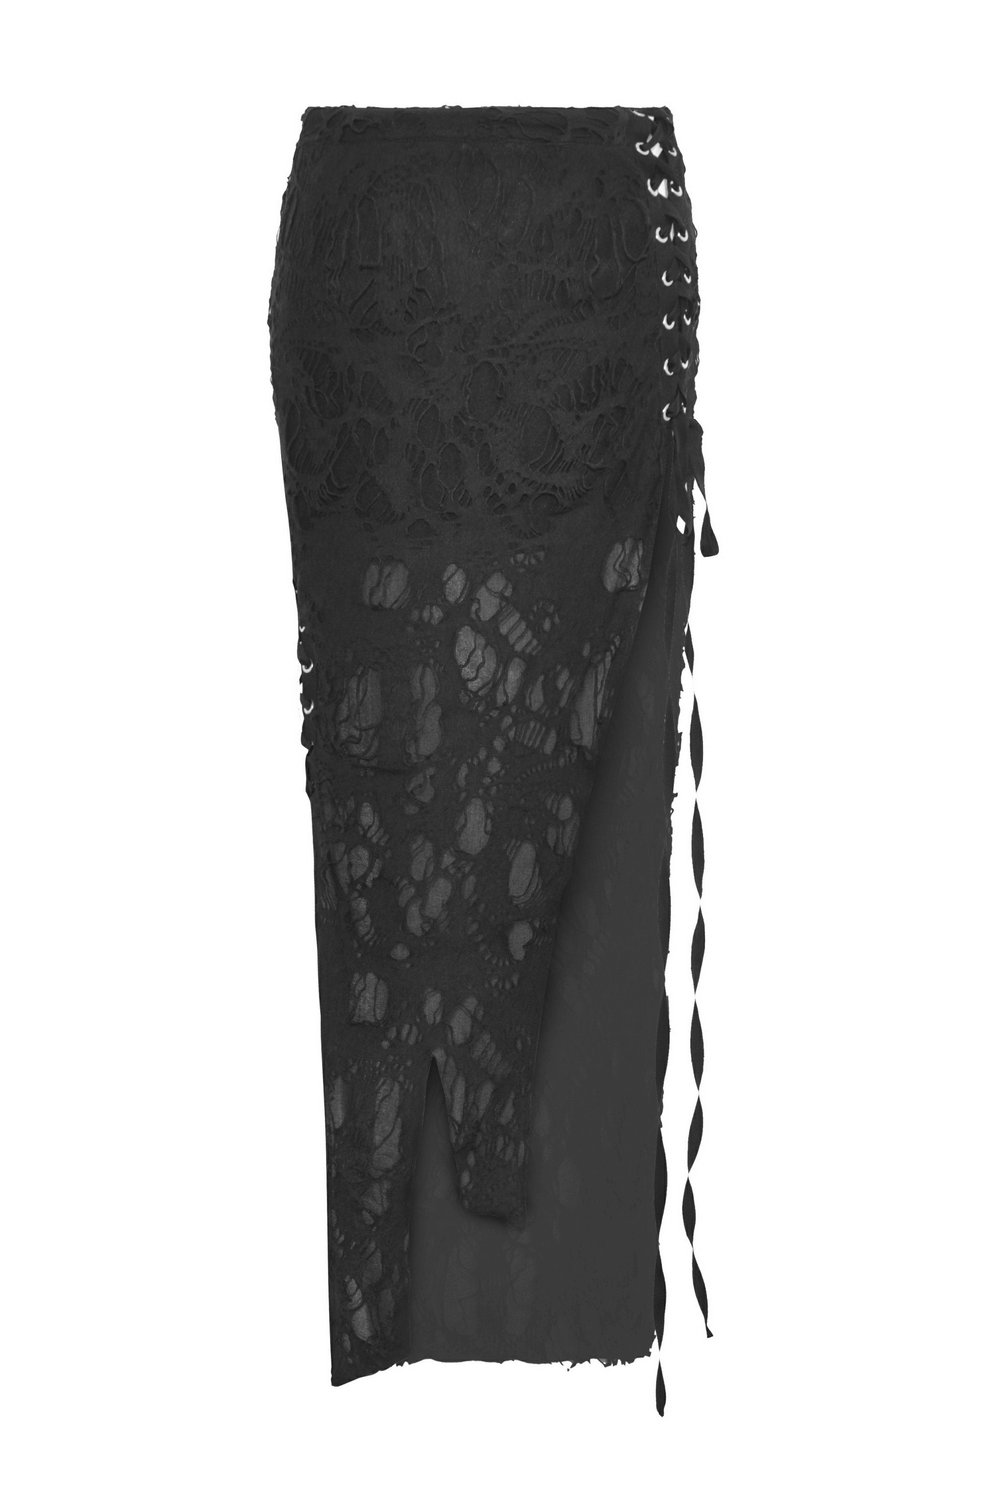 Elegant Gothic Lace Detailed Side-Laced Long Skirt